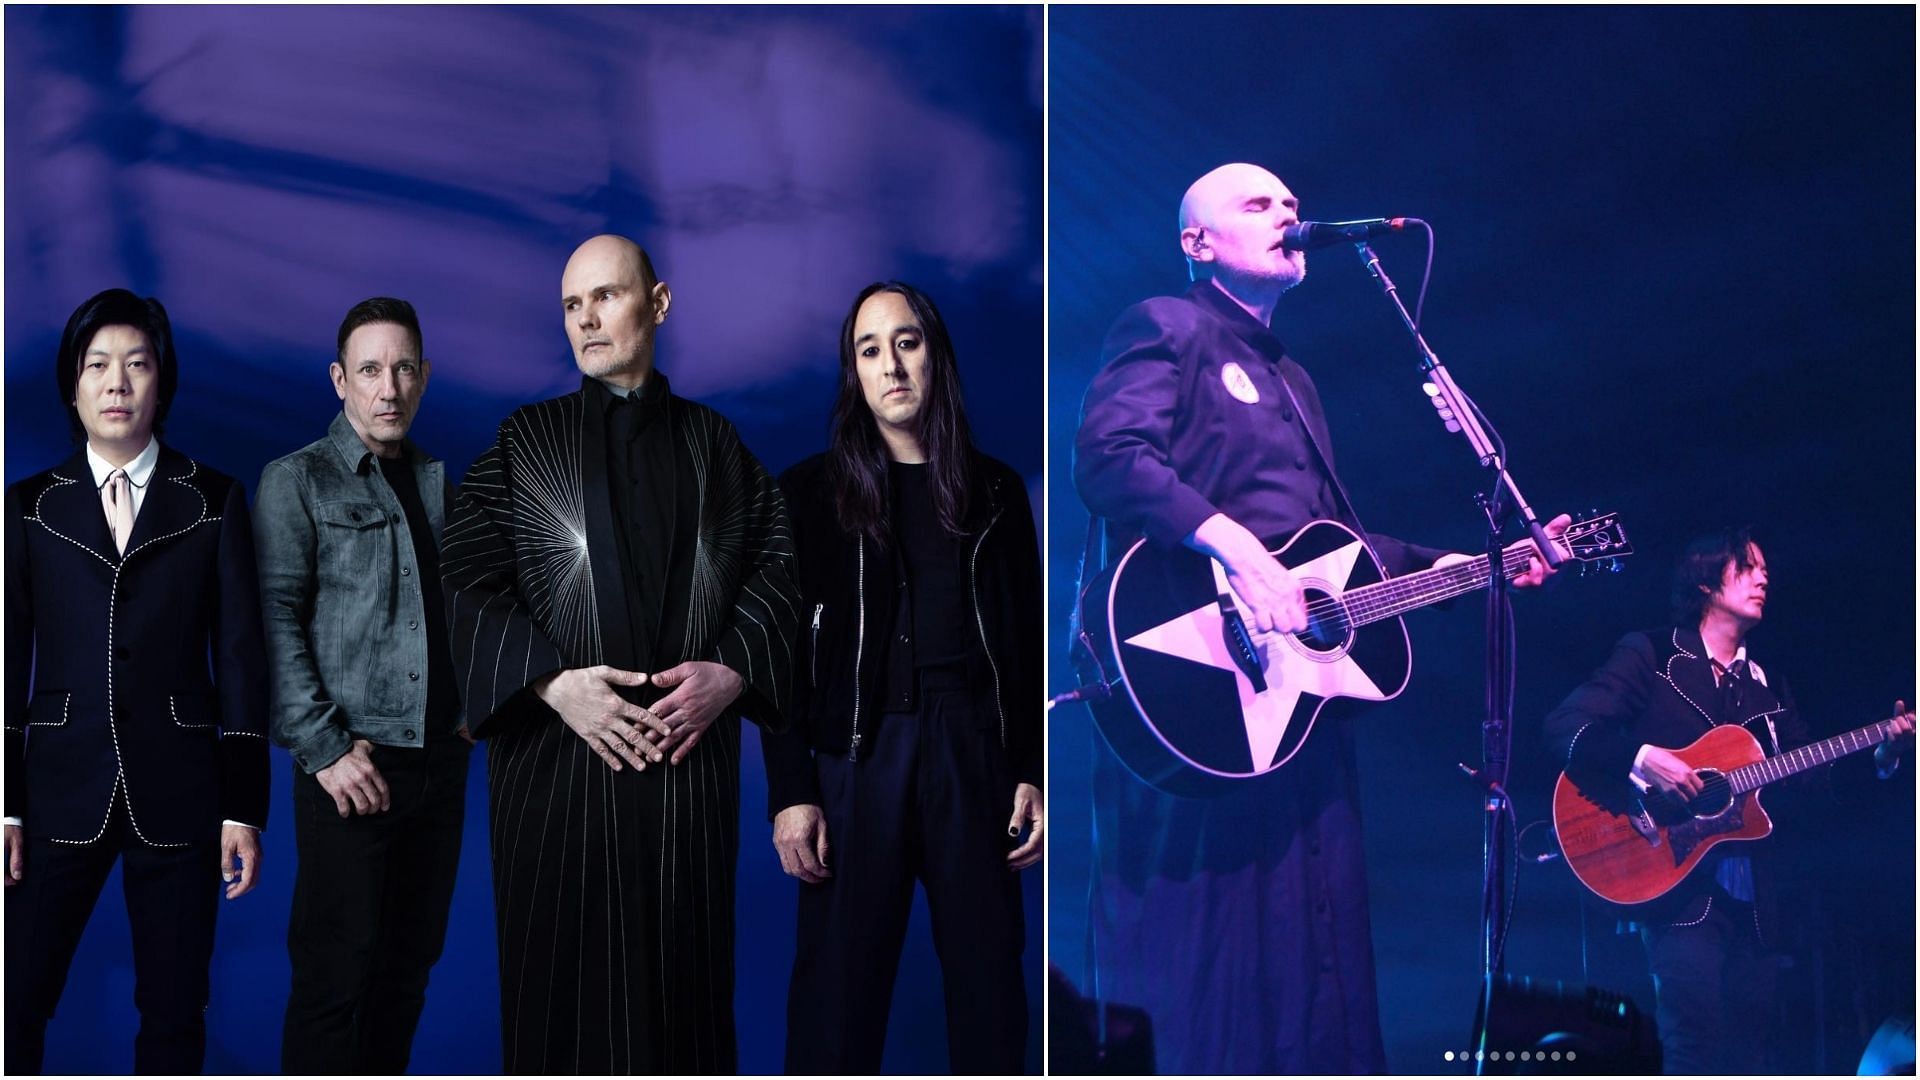 Smashing Pumpkins Tour 2022 Tickets, presale, where to buy, dates and more